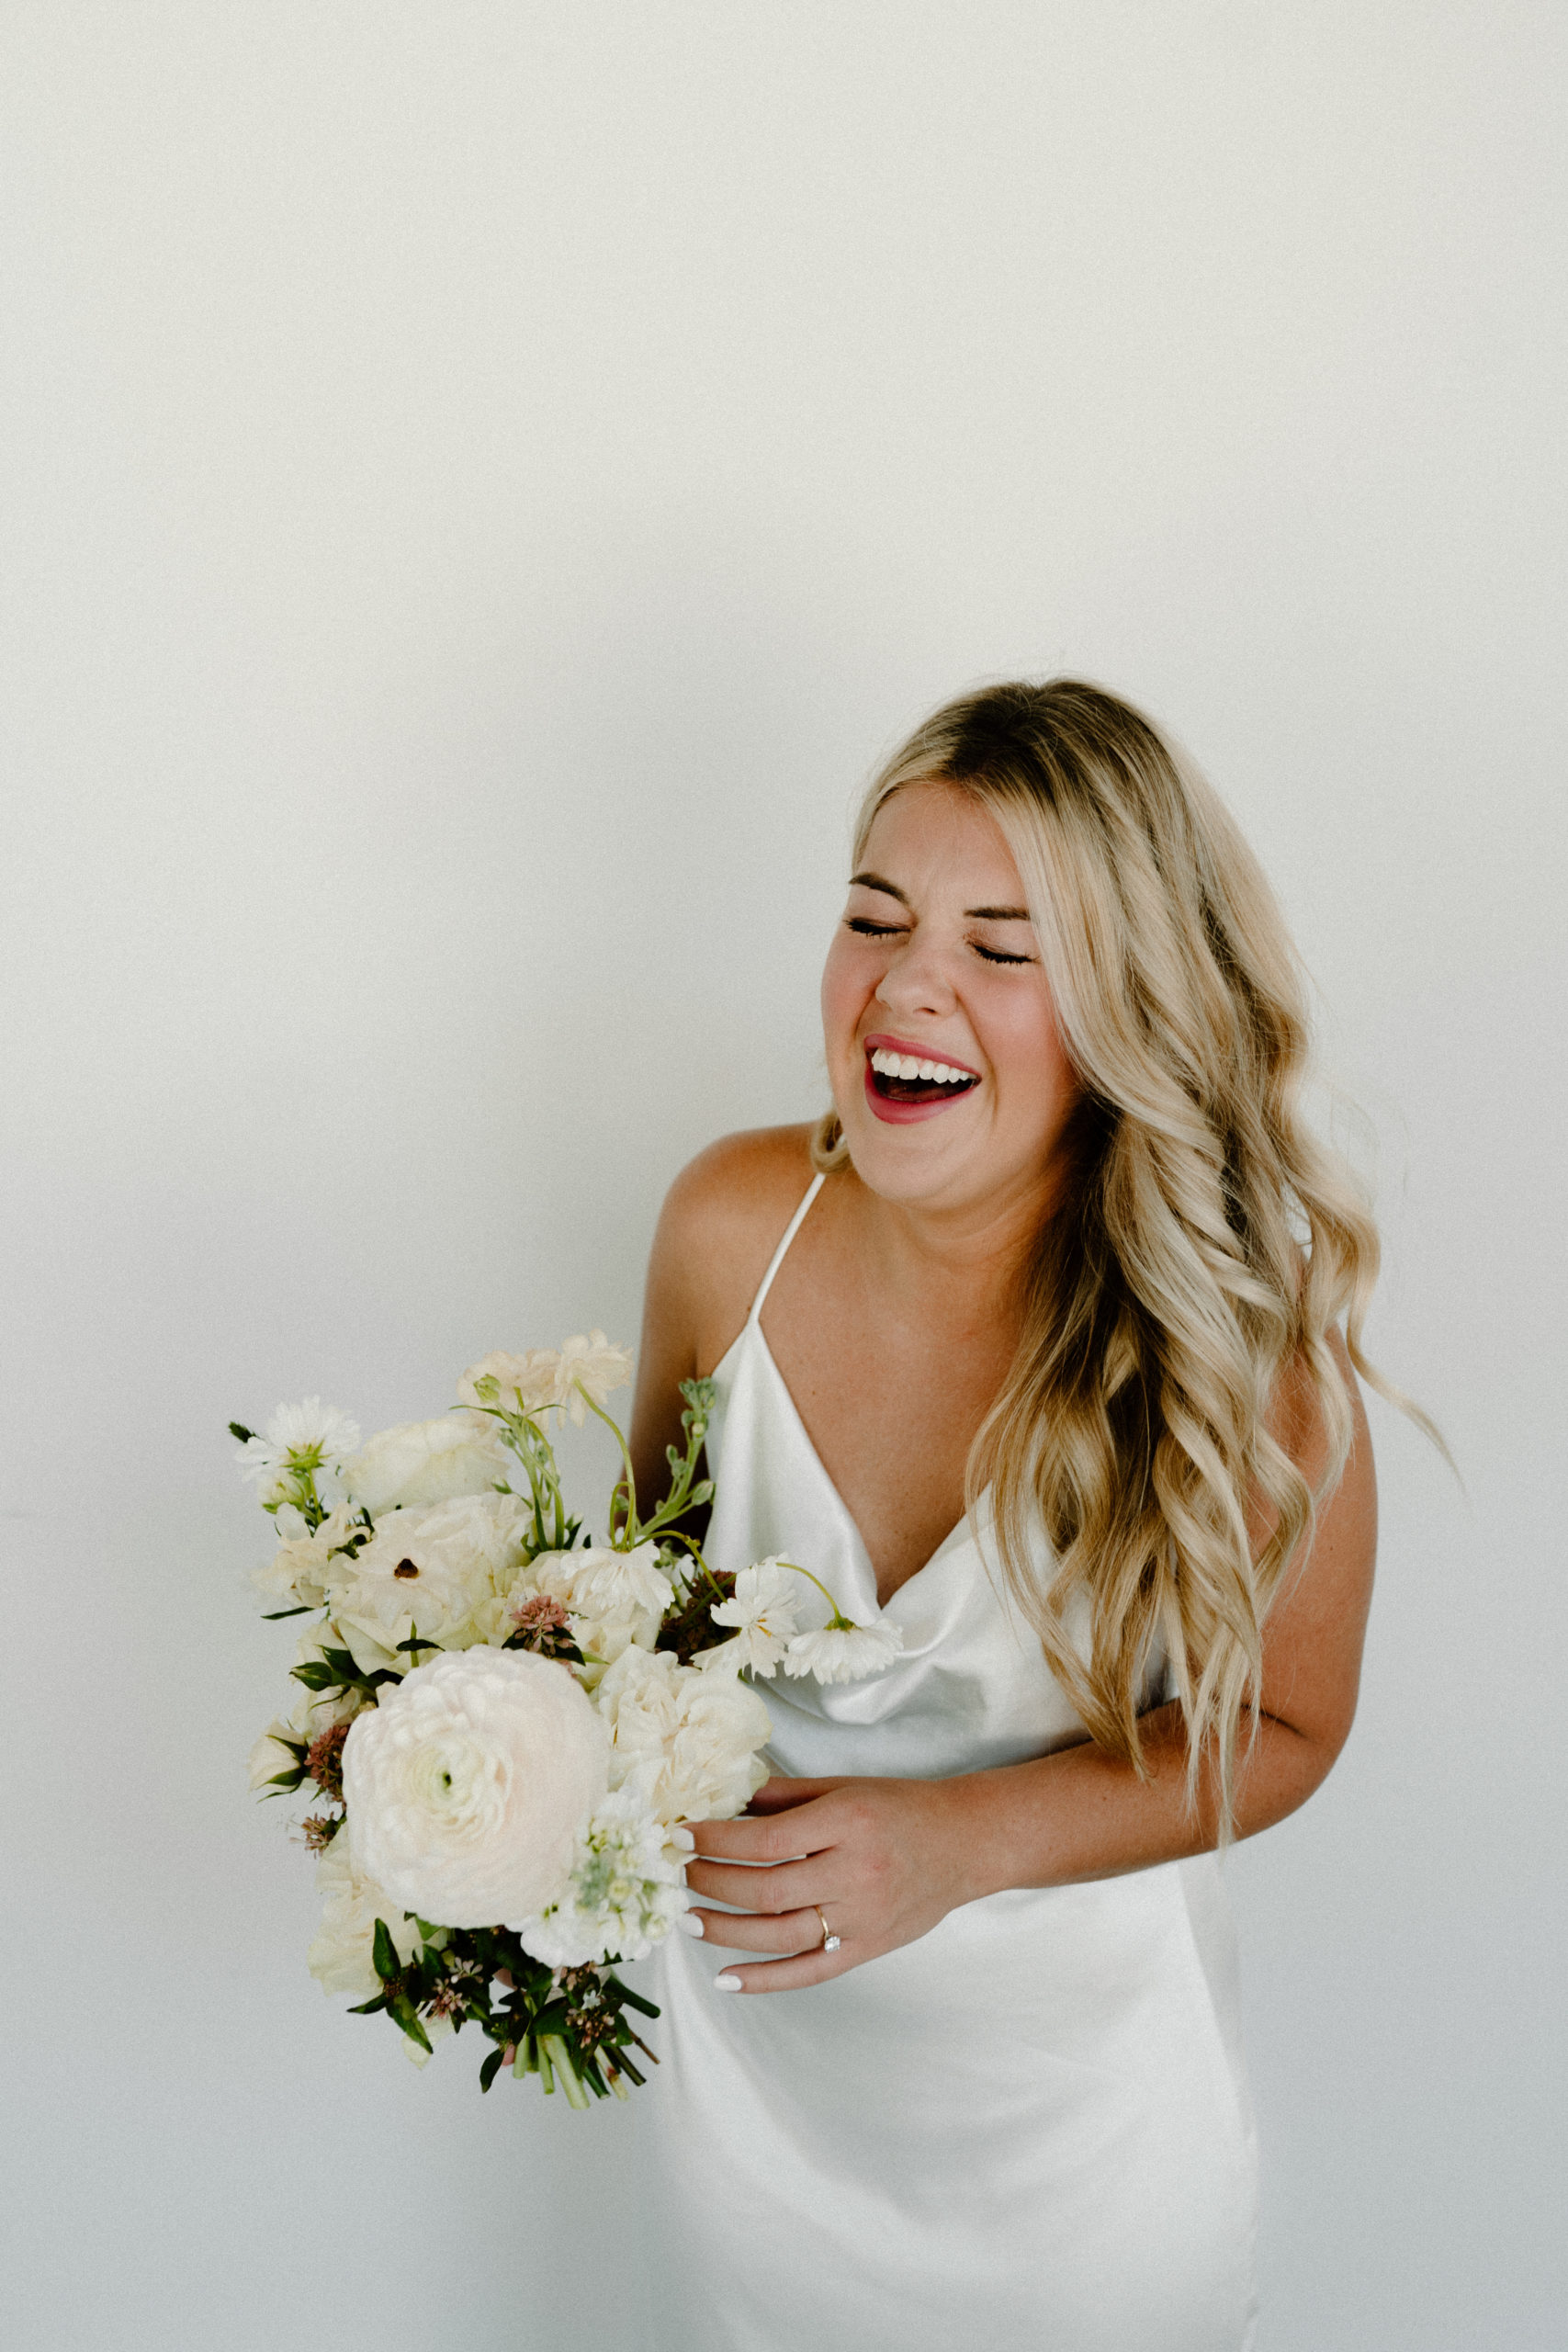 Laughing bride with flowers